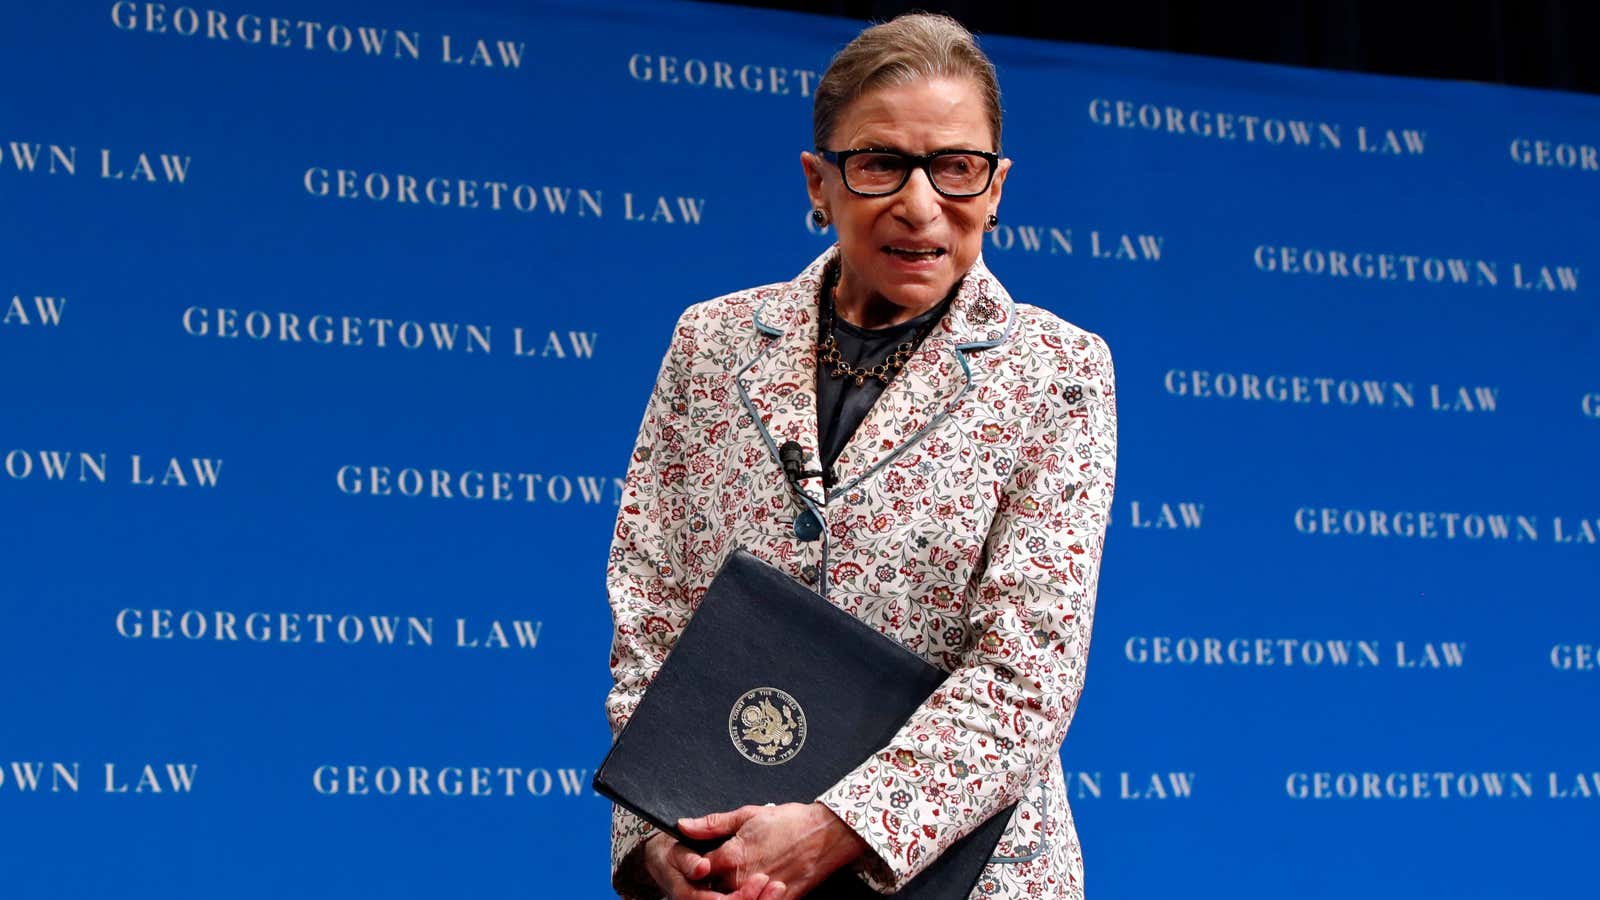 RBG is taking some time off to recover from a fall in which she broke three ribs.